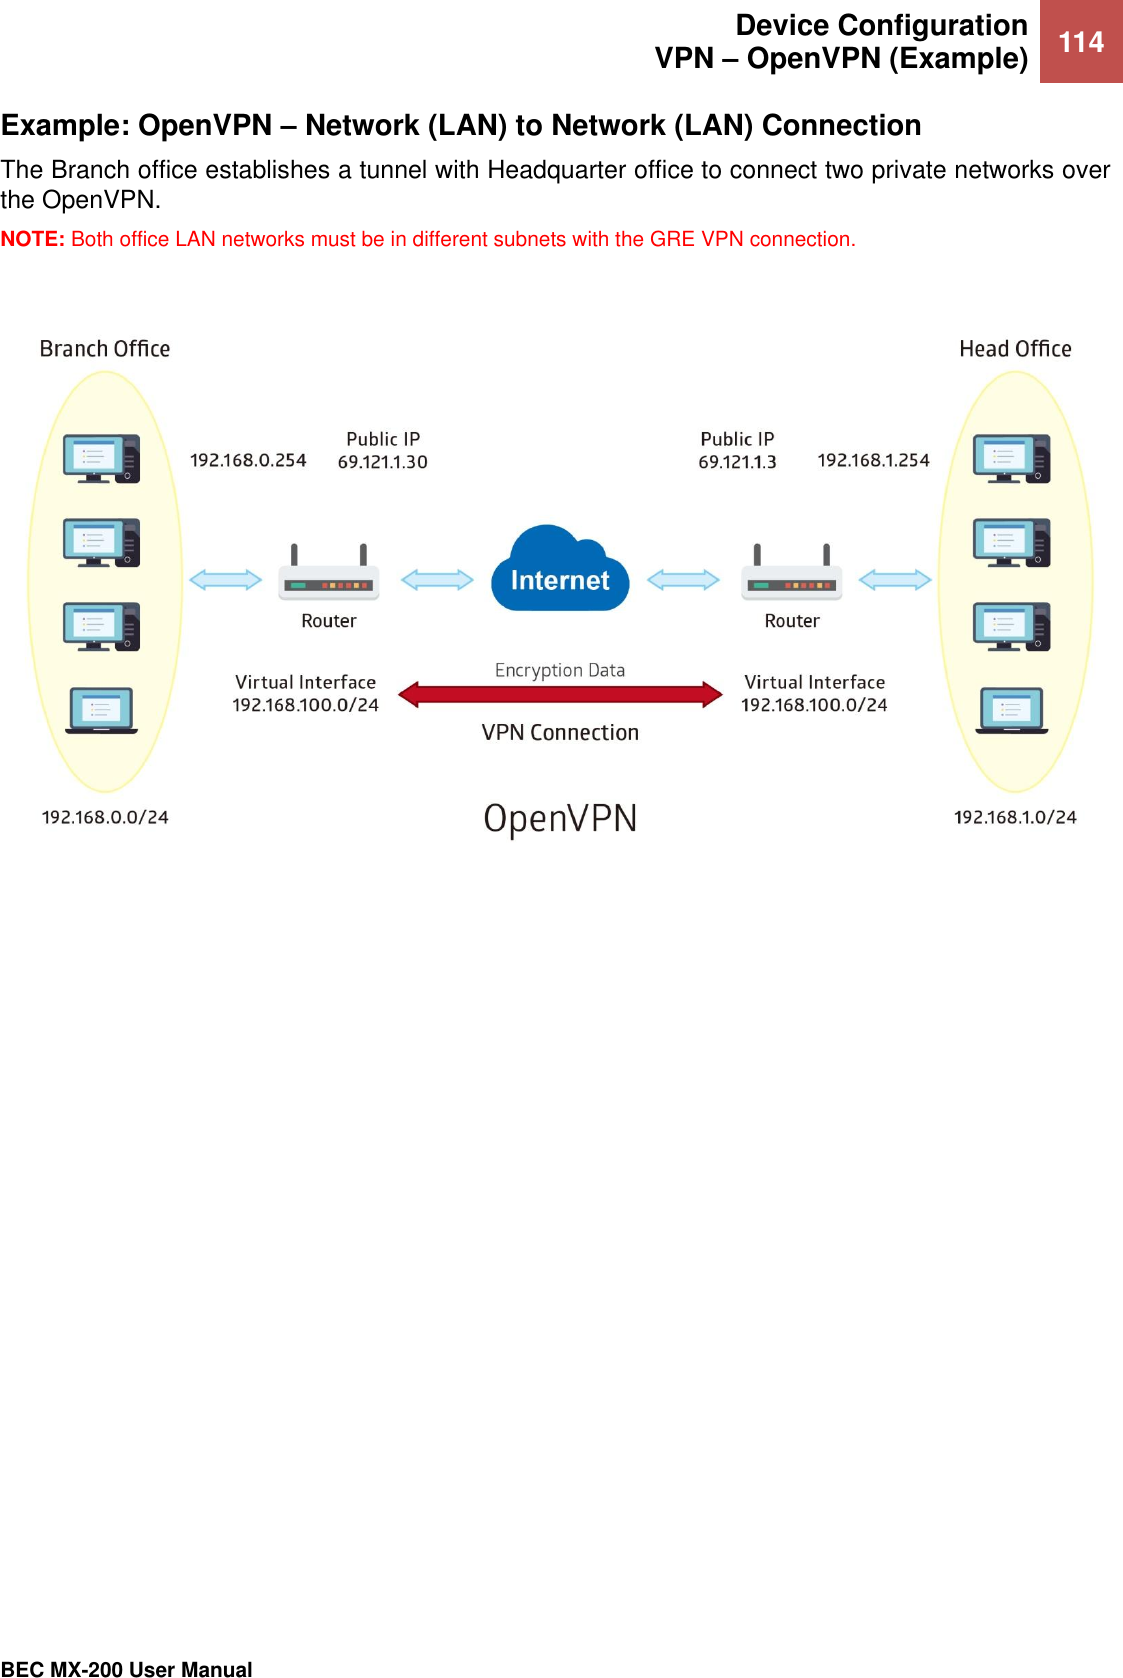  Device Configuration VPN – OpenVPN (Example) 114   BEC MX-200 User Manual  Example: OpenVPN – Network (LAN) to Network (LAN) Connection The Branch office establishes a tunnel with Headquarter office to connect two private networks over the OpenVPN.  NOTE: Both office LAN networks must be in different subnets with the GRE VPN connection.    